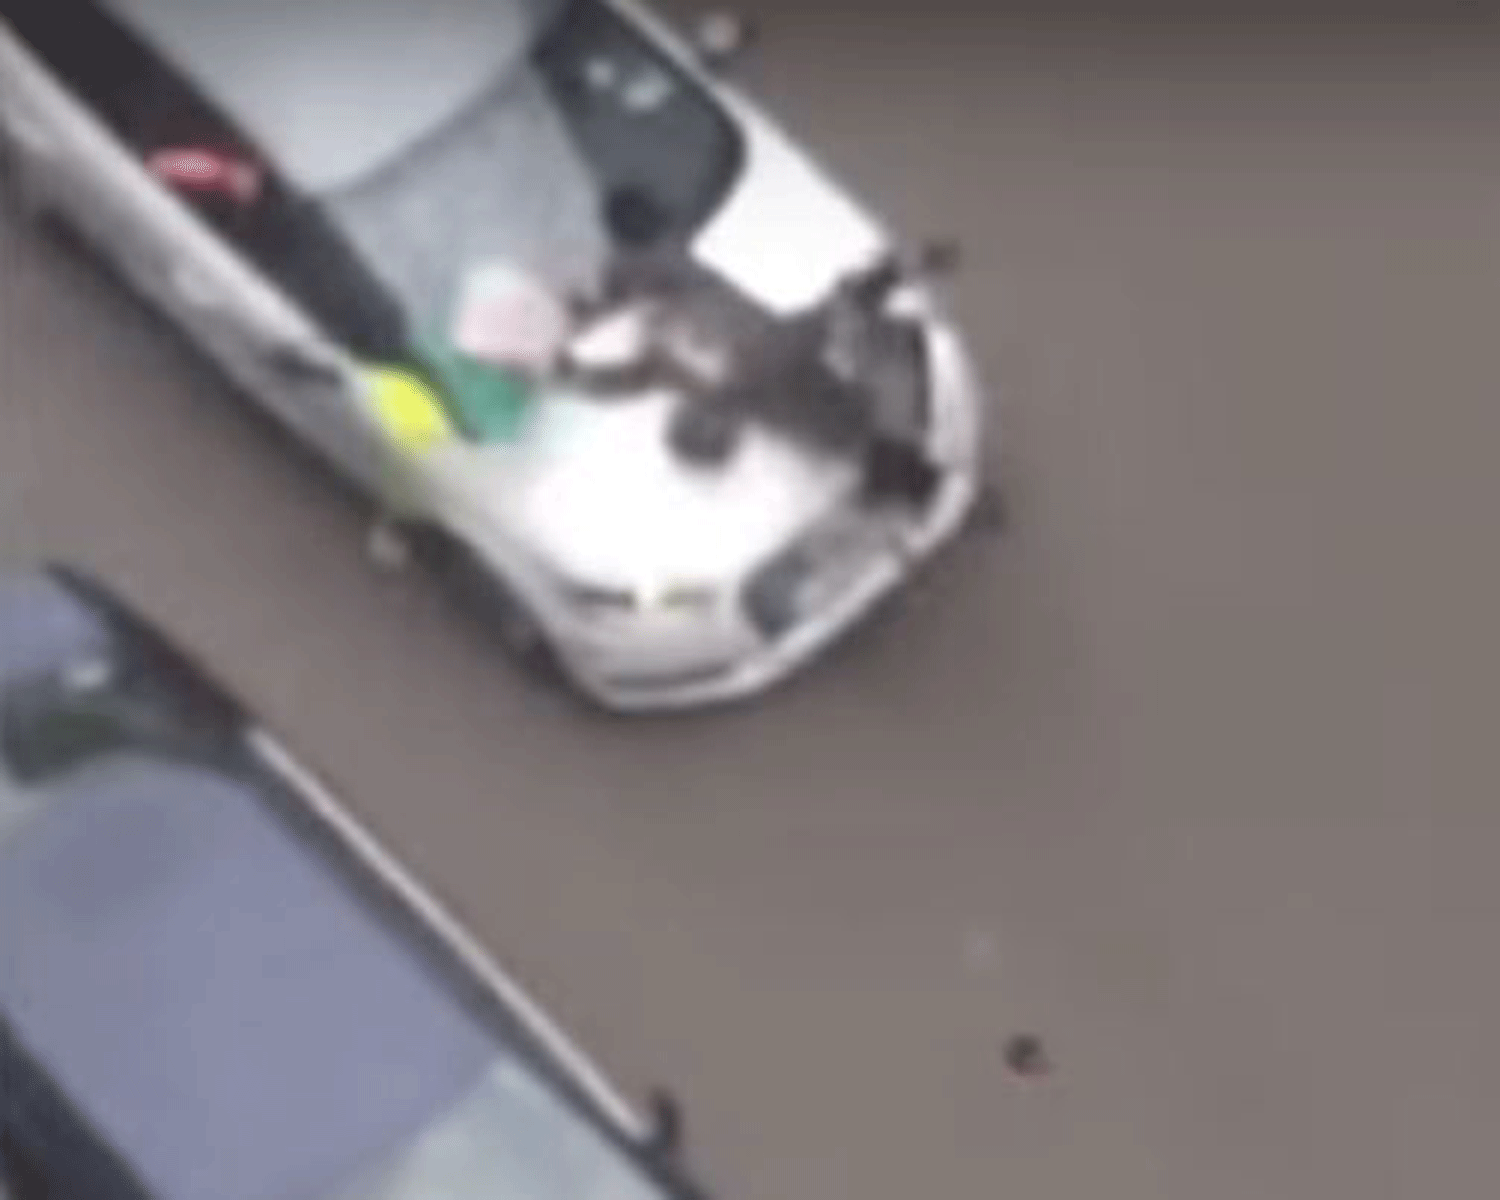 The car does not stop as it ploughs into a Muslim woman crossing the road